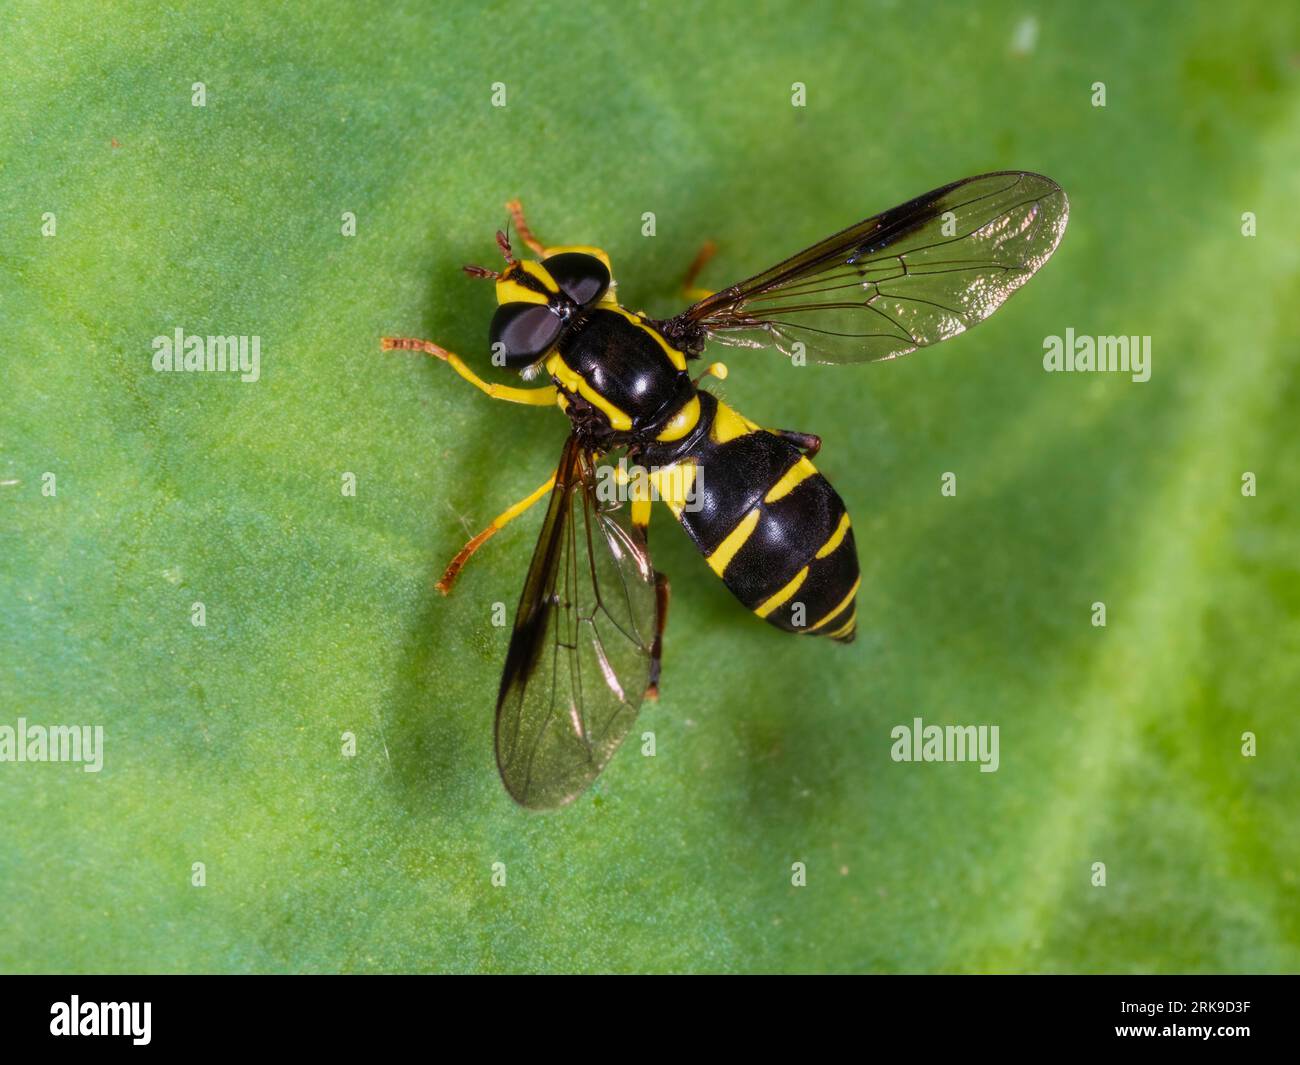 Adult female Xanthogramma pedissequum, superb ant-hill hoverfly, resting in a Devon, UK garden Stock Photo